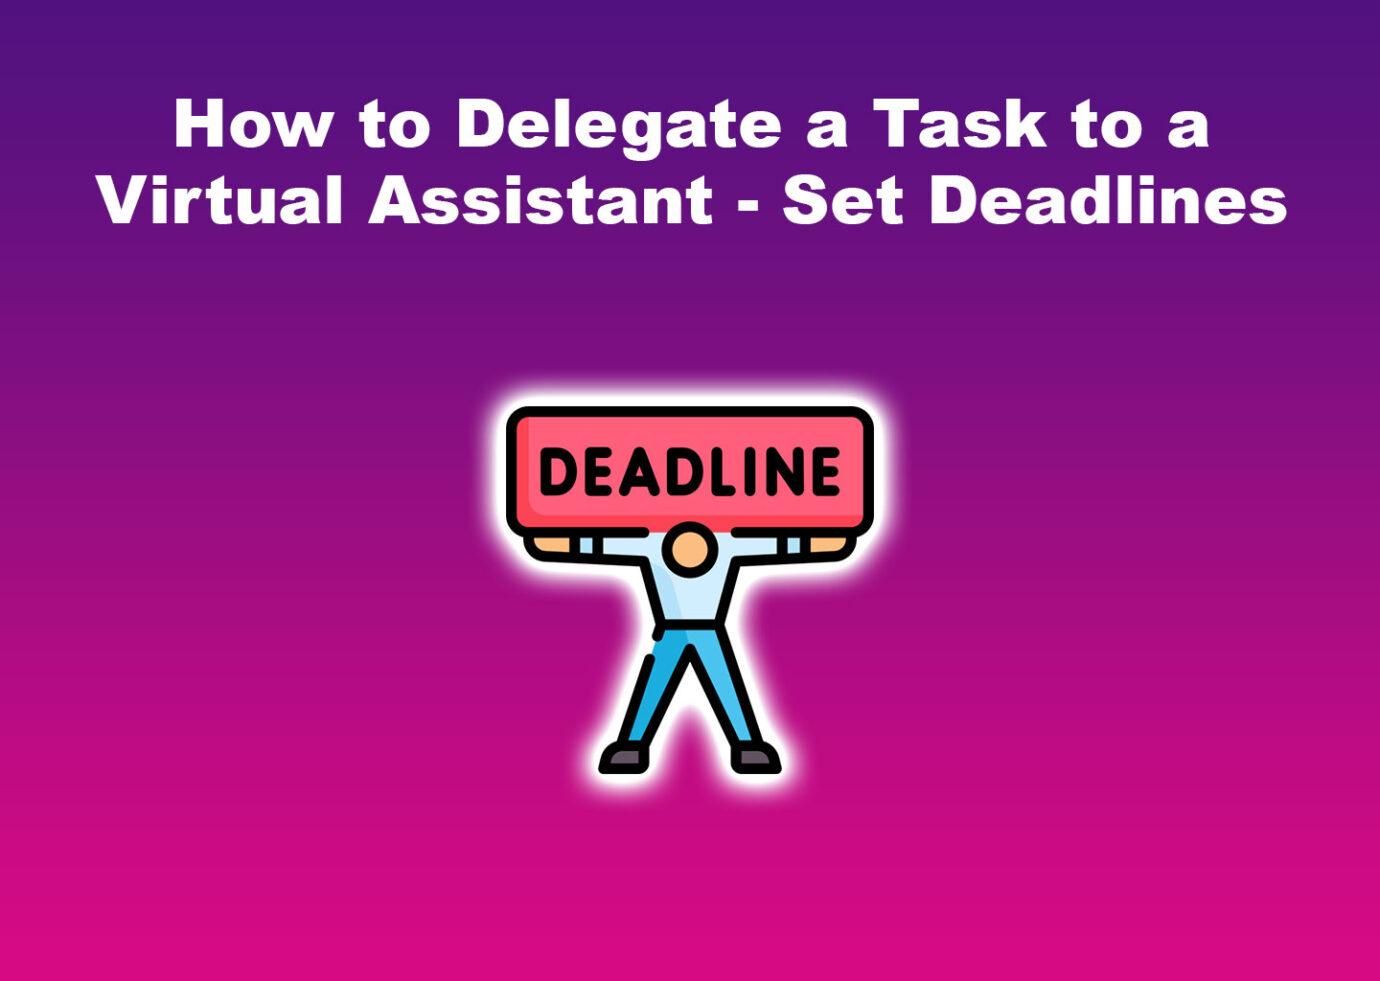 How to Delegate a Task to a Virtual Assistant - Set Deadlines